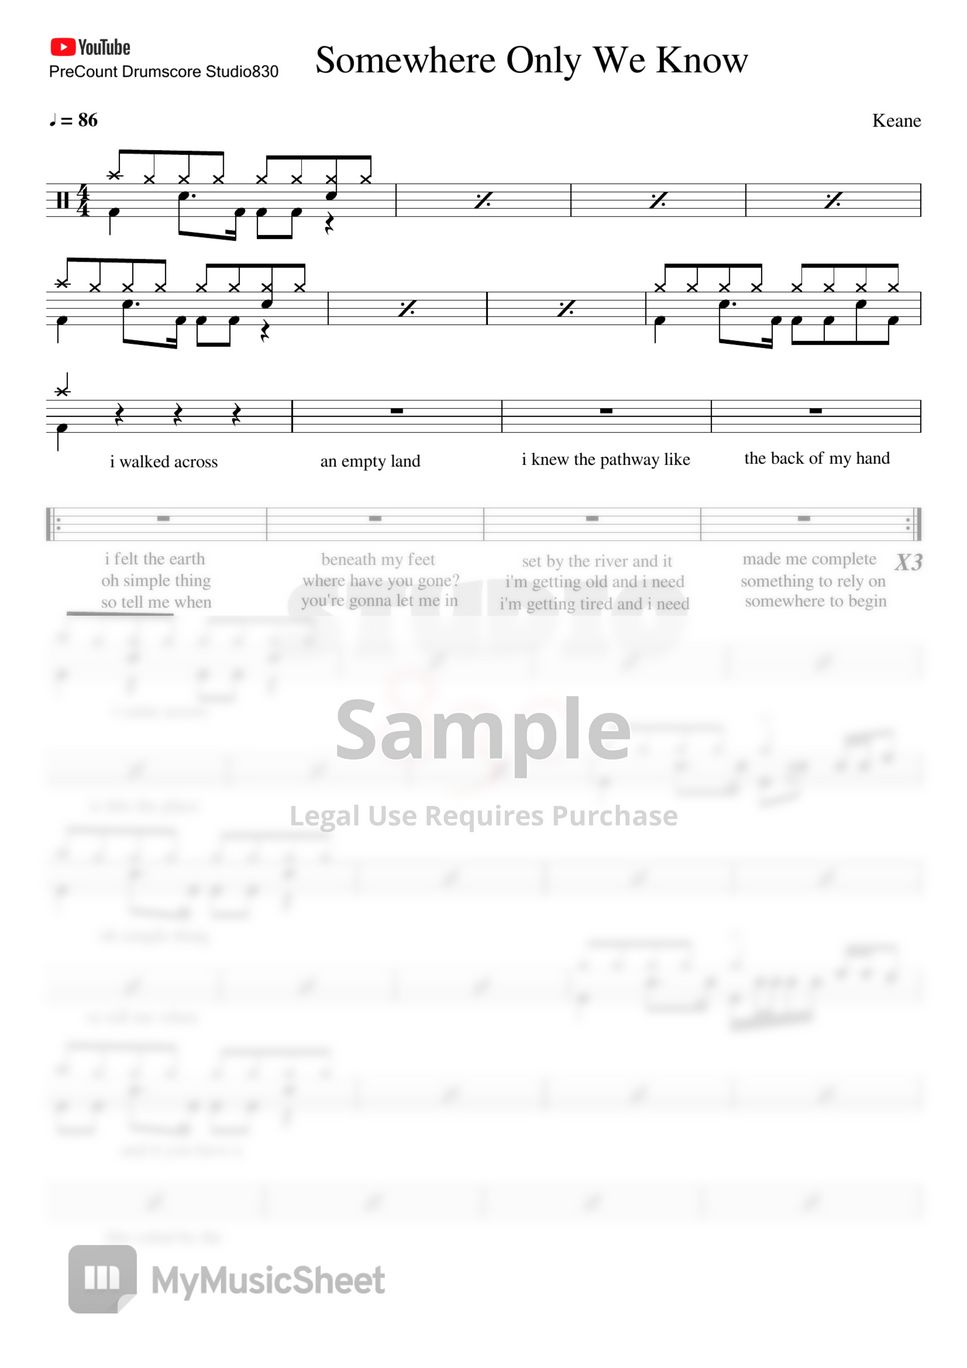 Keane - Somewhere_Only_We_Know Sheet by studio830